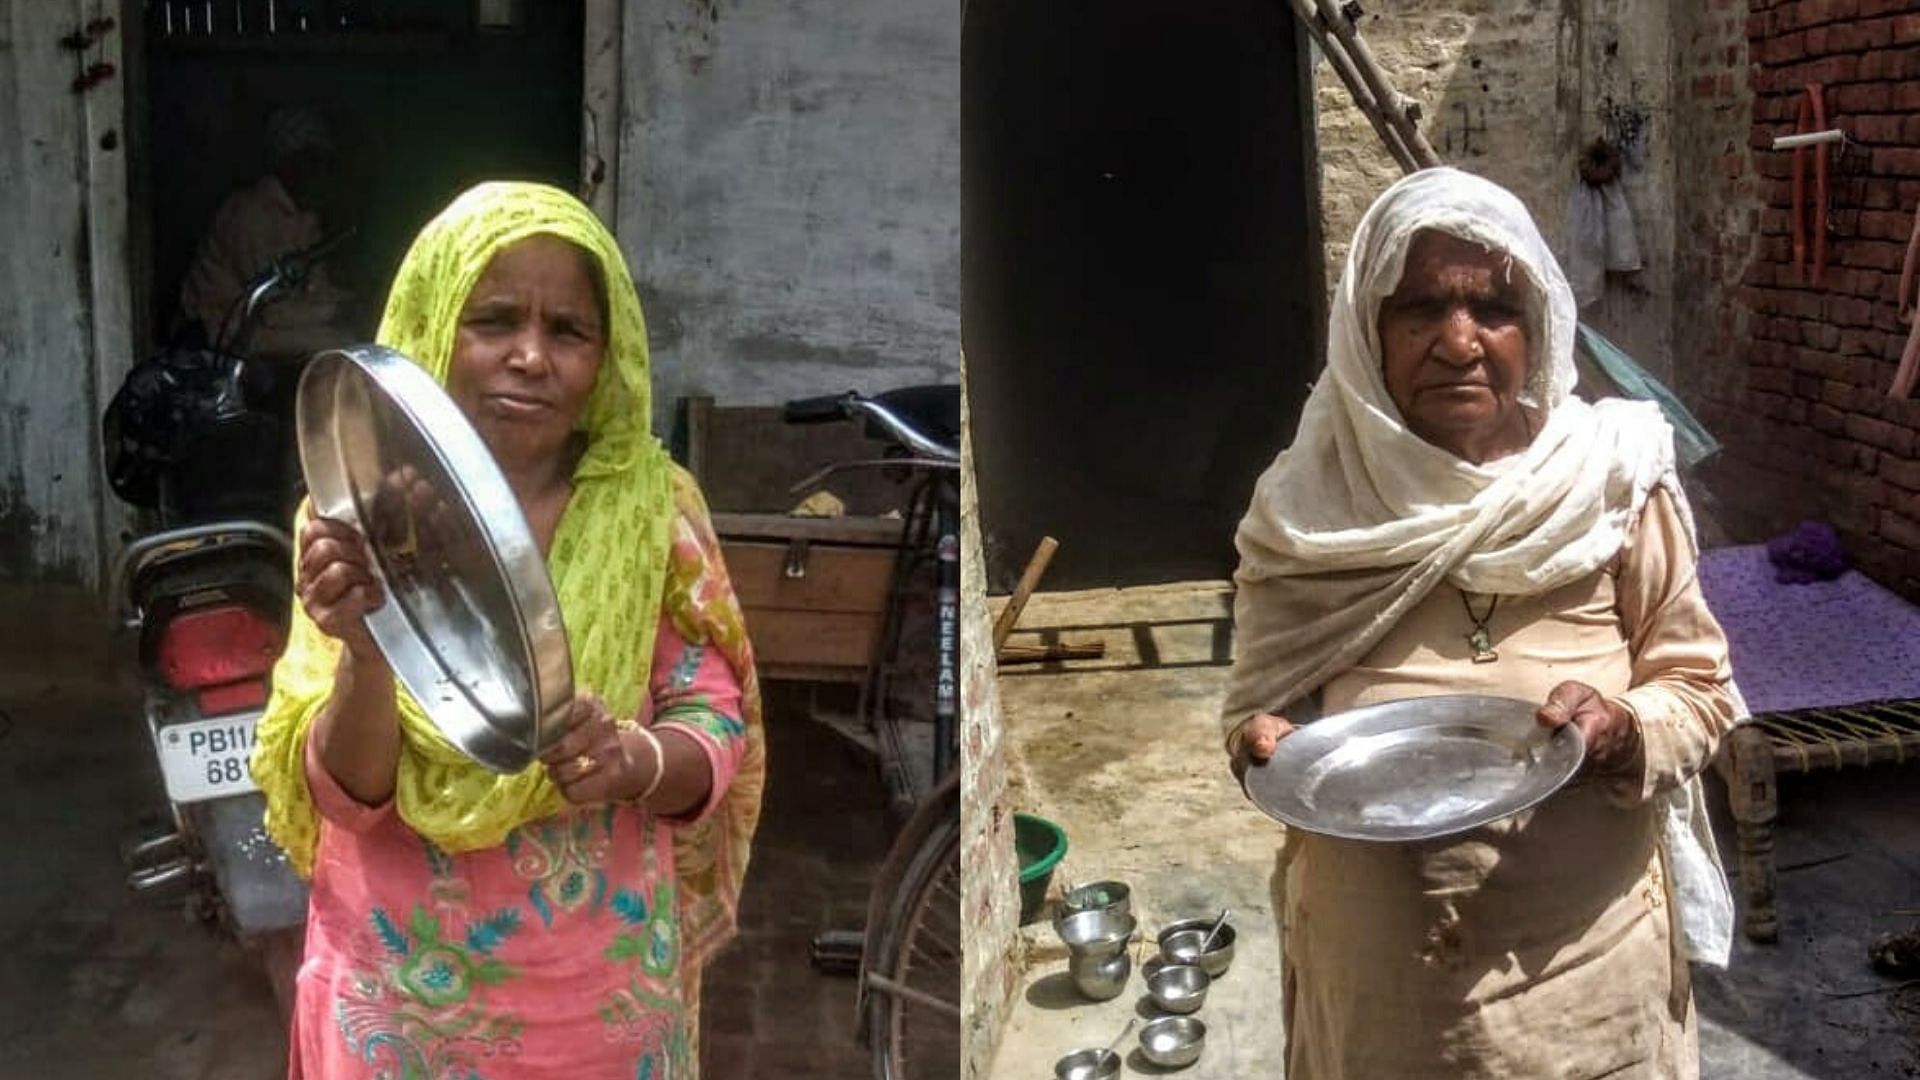 During the Covid-19 lockdown, MGNREGA workers in Patiala’s Nabha division from the state of Punjab banged empty plates to protest the lack of food and money.